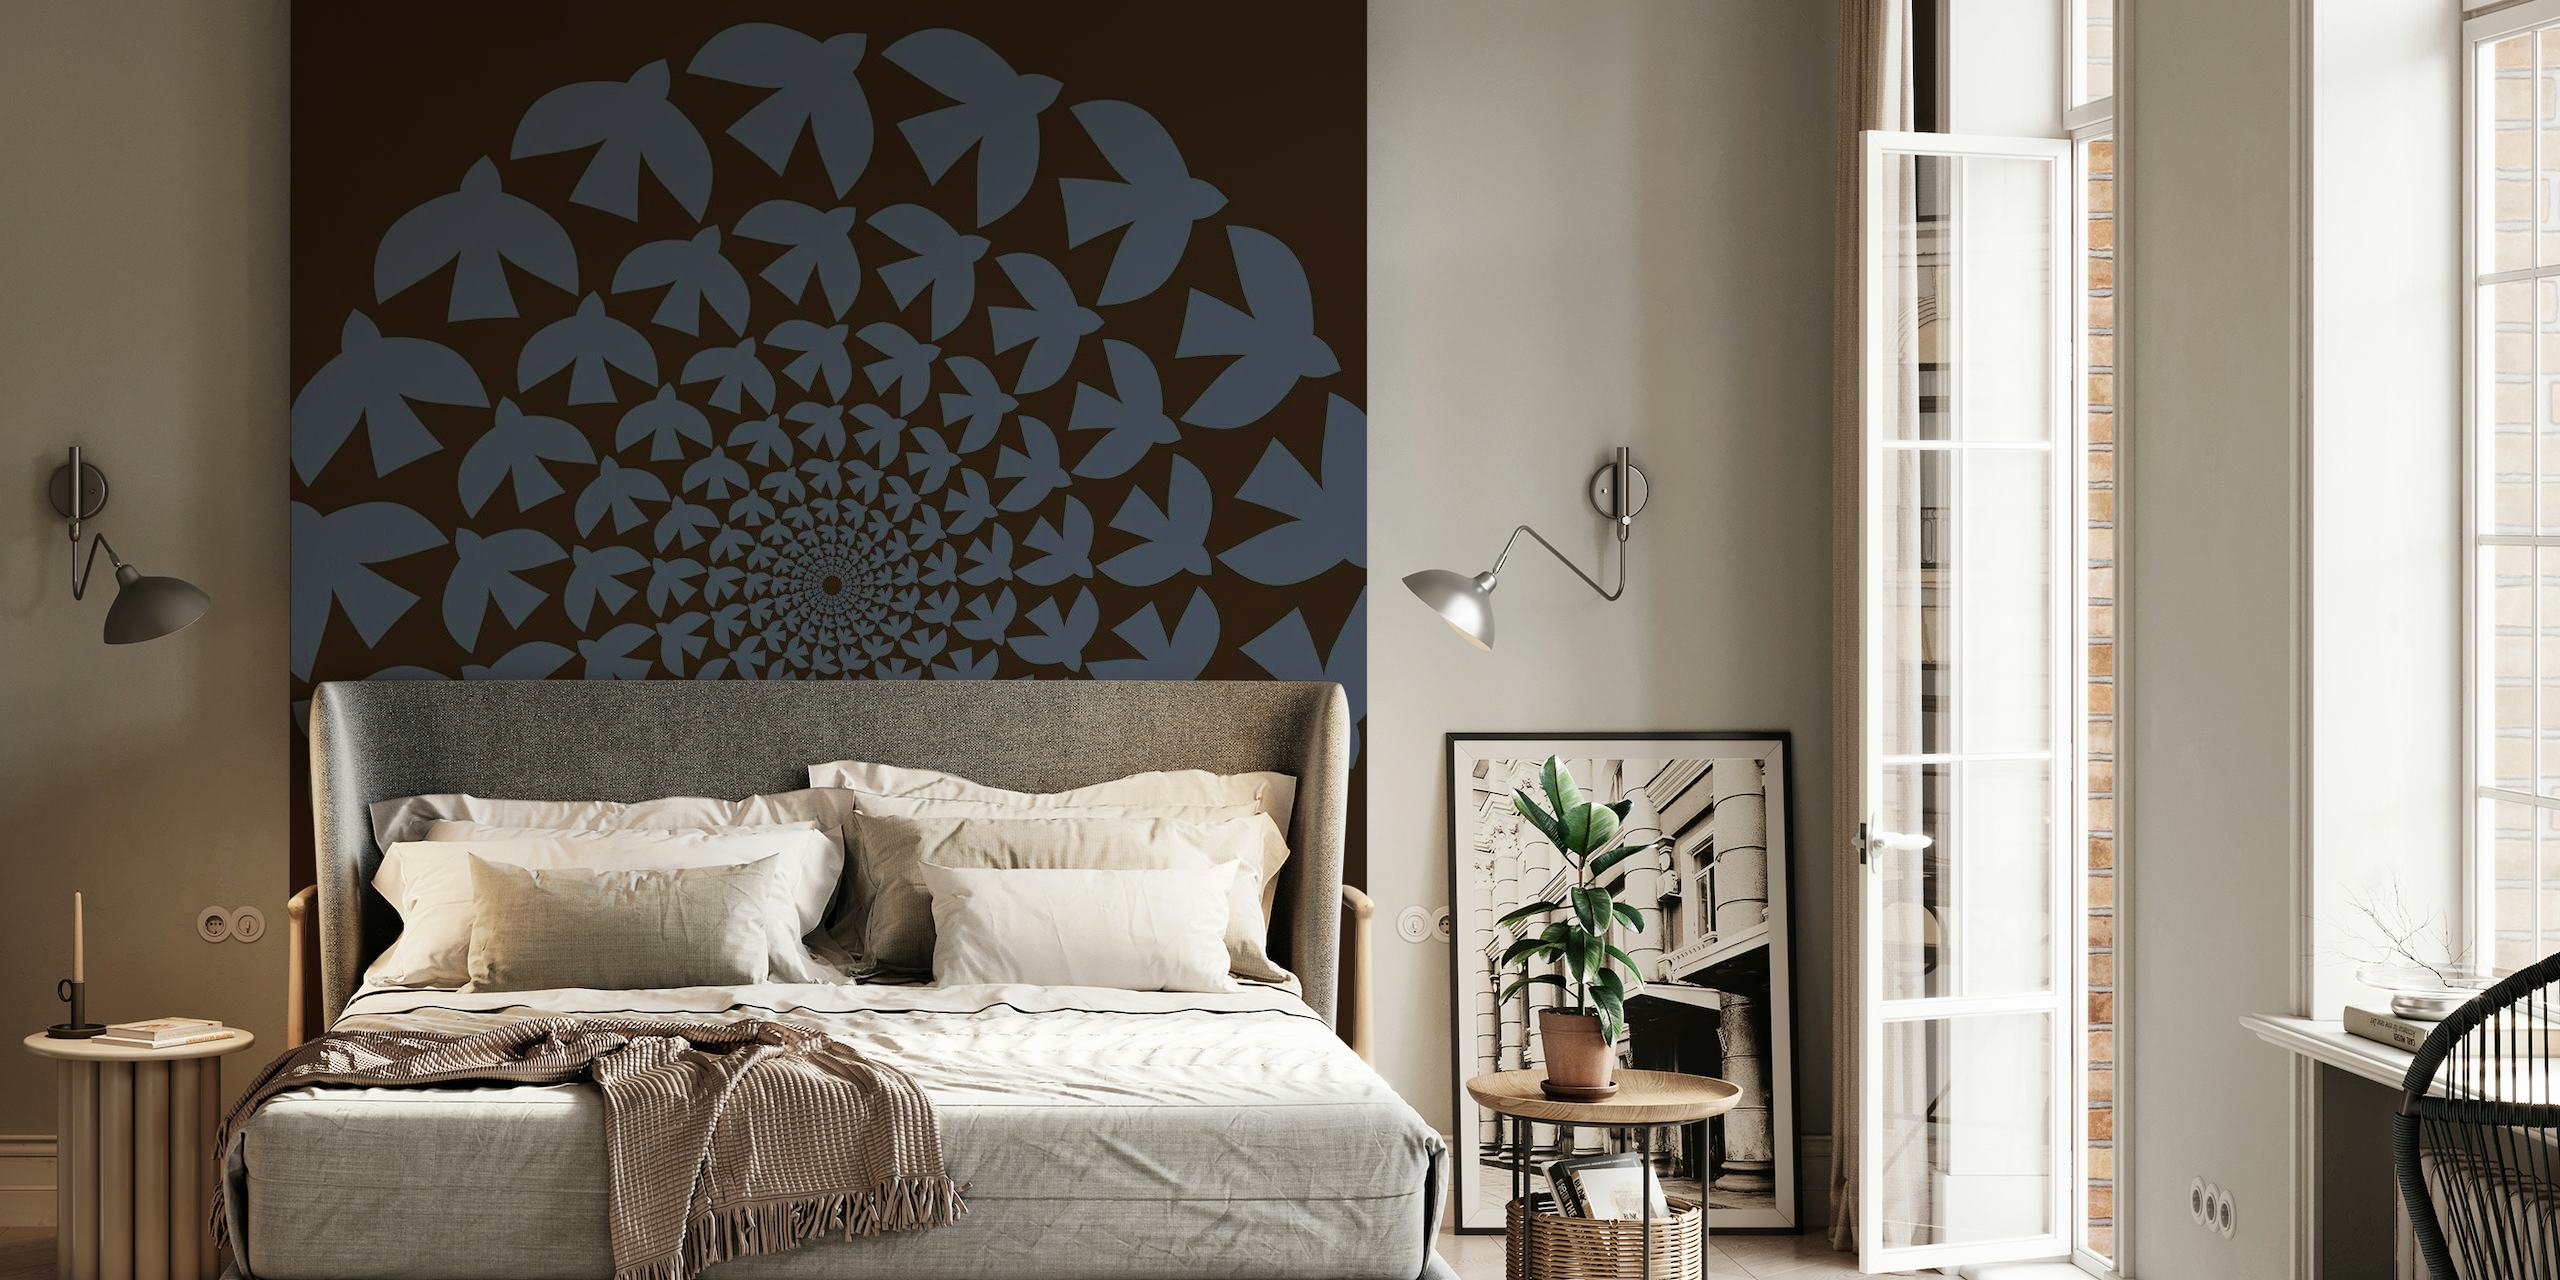 Abstract kaleidoscopic wall mural with black bird silhouettes on a dark brown background